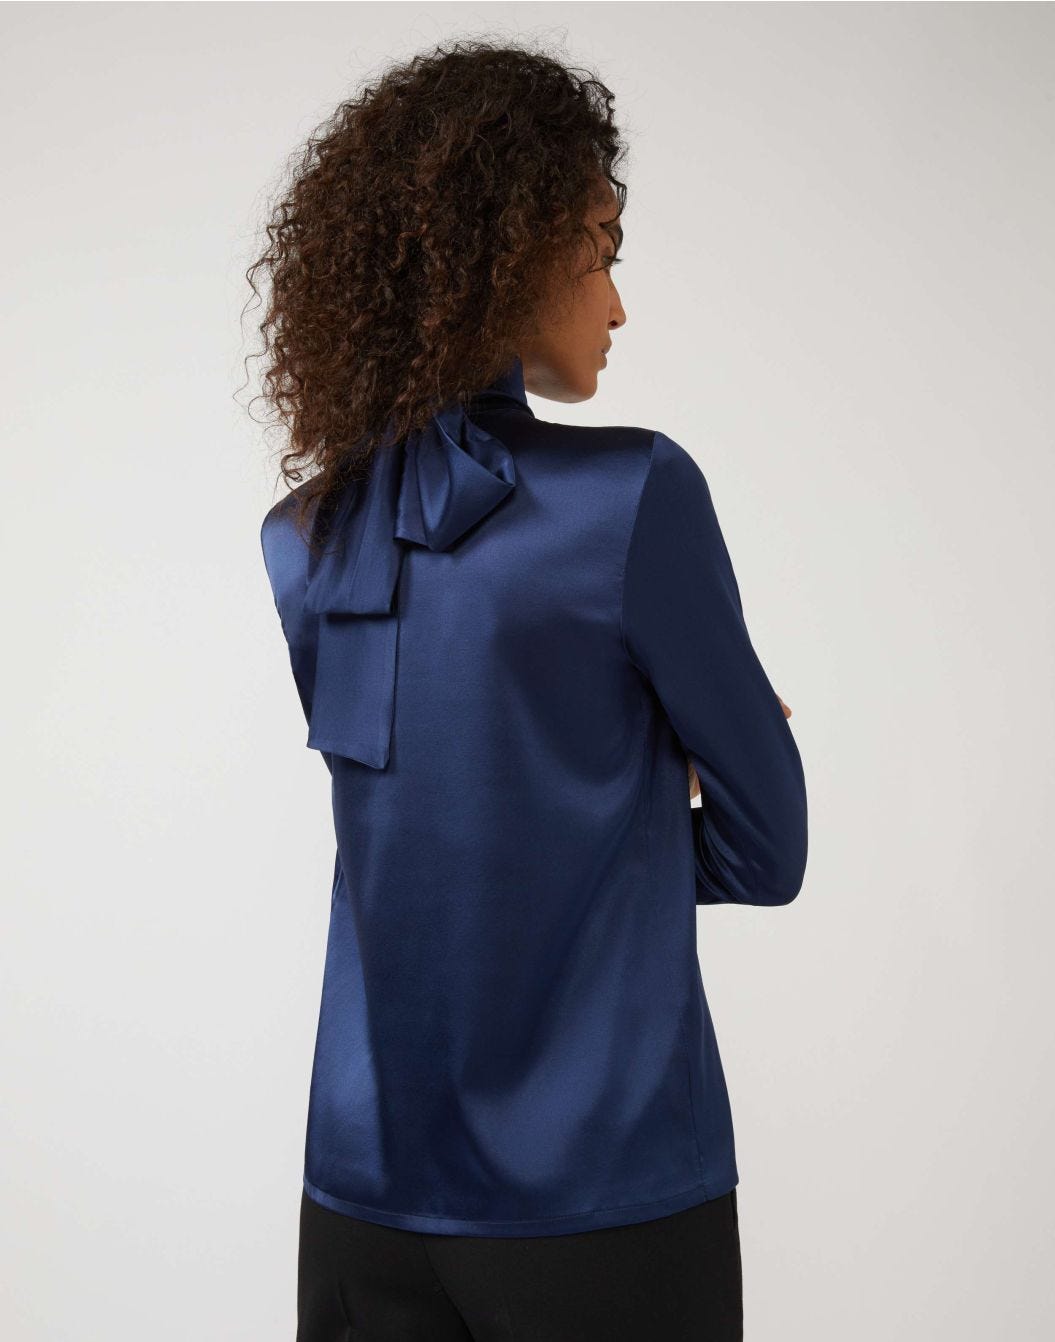 Long-sleeve top in blue stretchy silk satin with bow detail